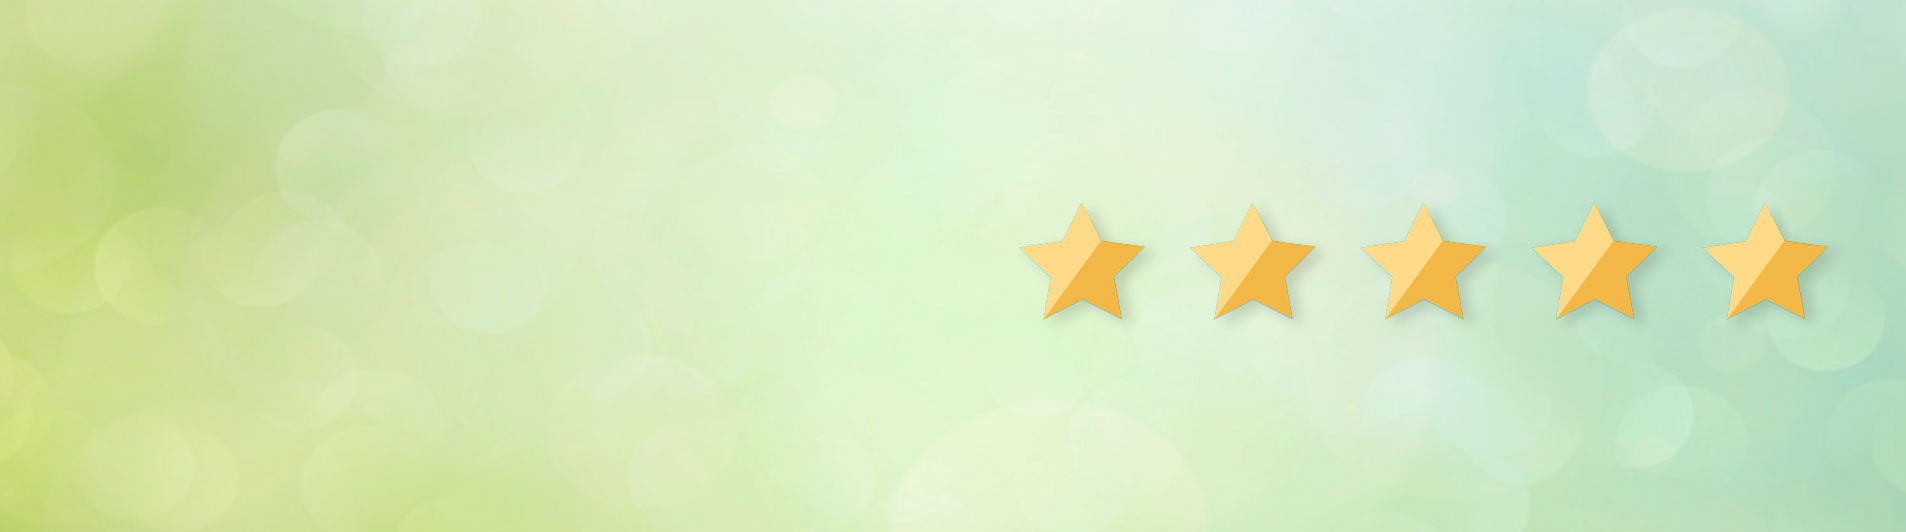 image of 5 golden stars on a blue background